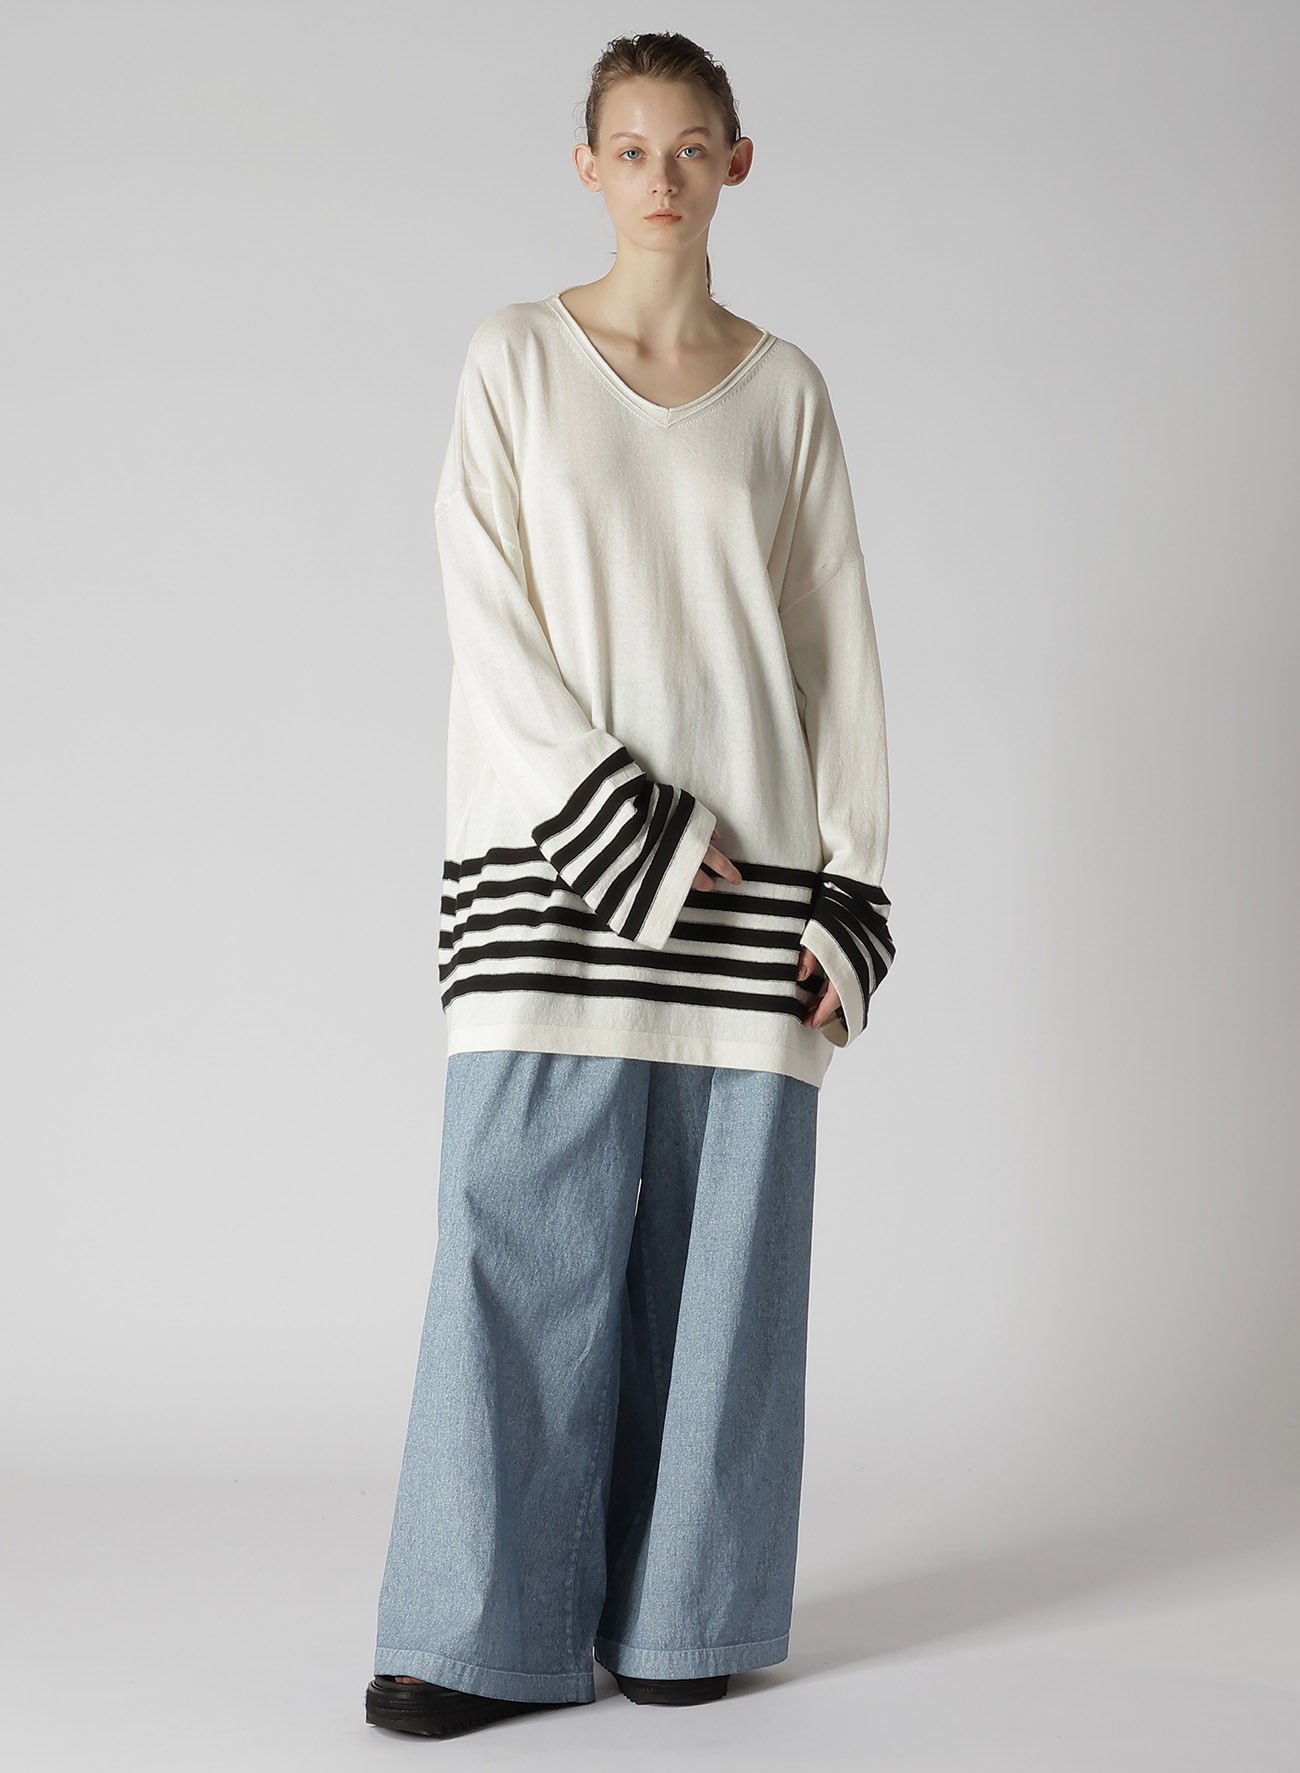 Ry/C TWISTED V NECK OVER SIZED PULLOVER KNIT(S White): Y's｜THE 